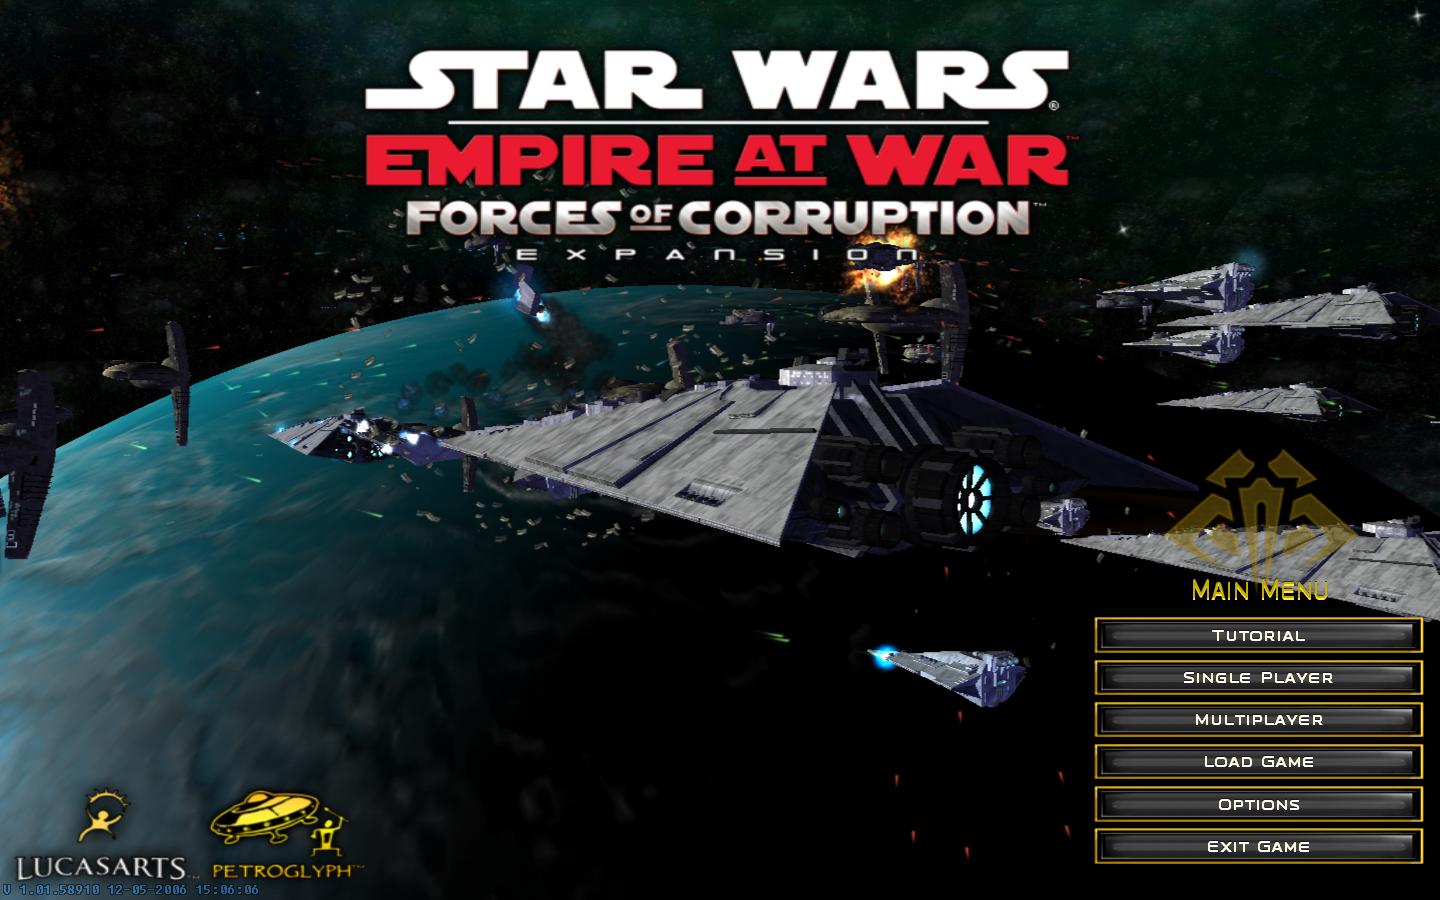 Star wars empire at war forces of corruption таблица cheat engine steam фото 114